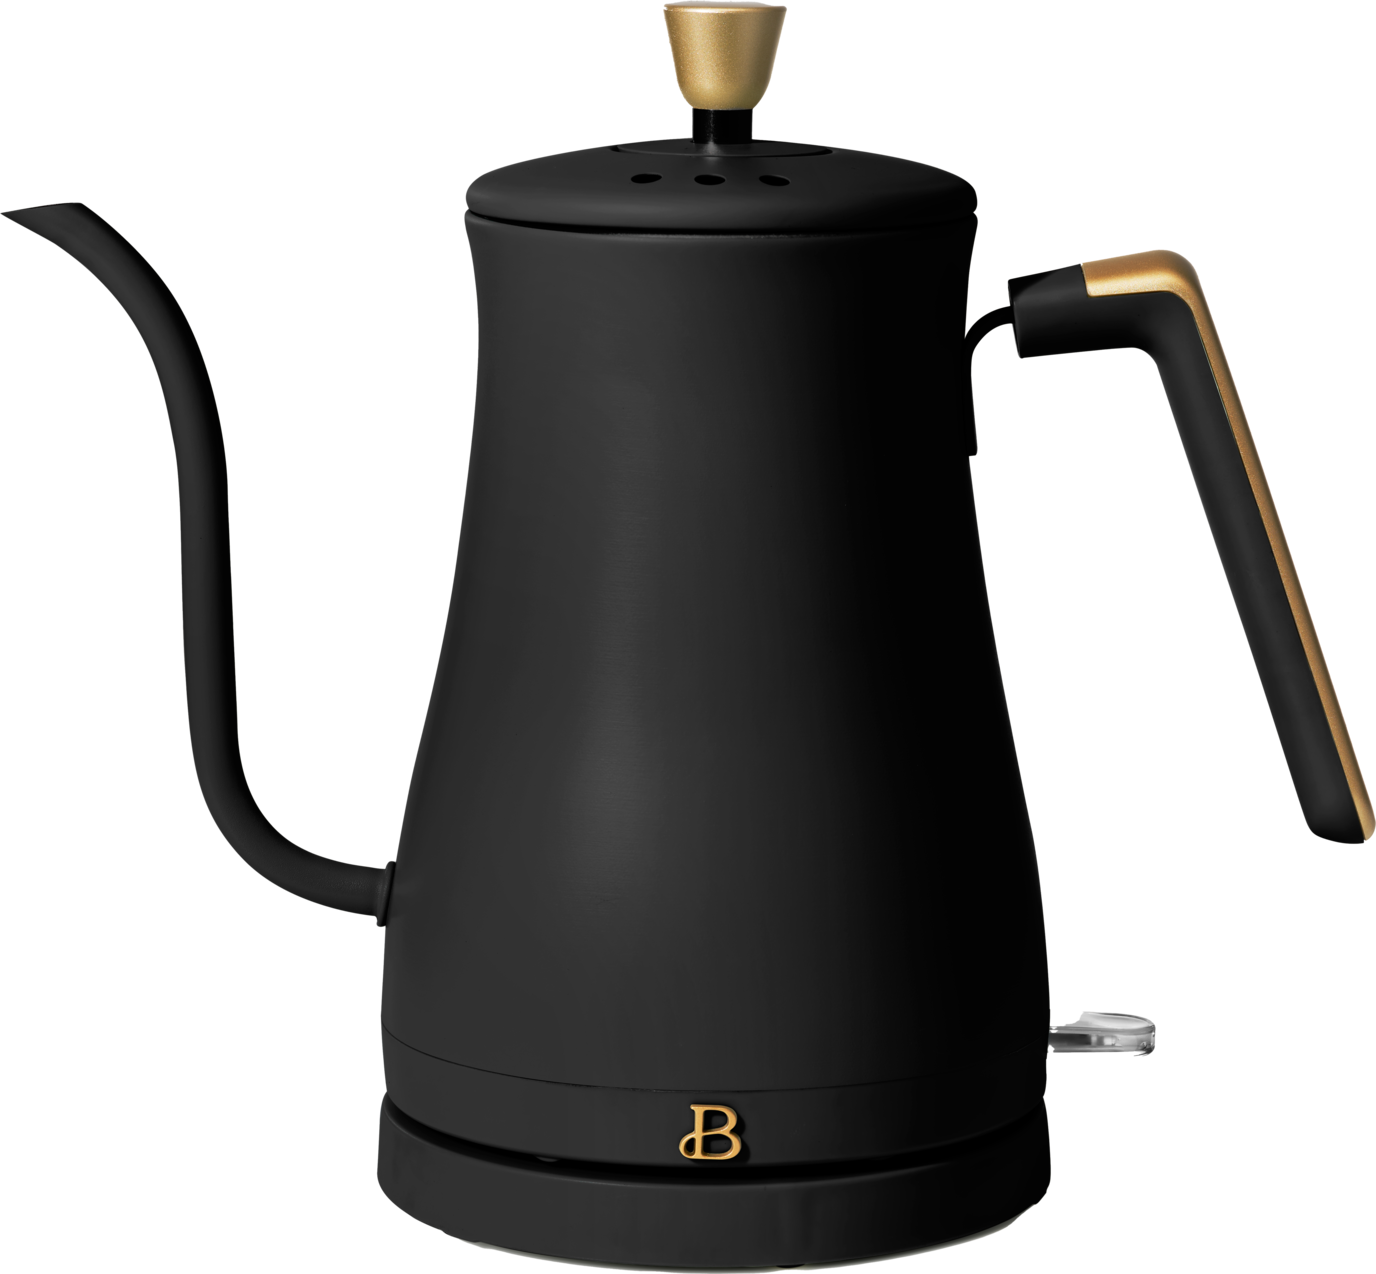 The absolutely awesome Pohl🇨🇭Schmitt Electric Kettle 